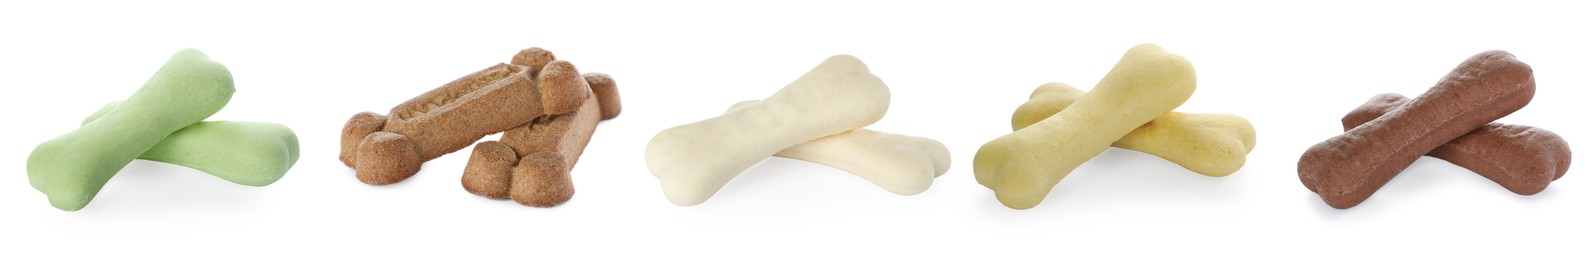 Set of different bone shaped dog cookies on white background. Banner design